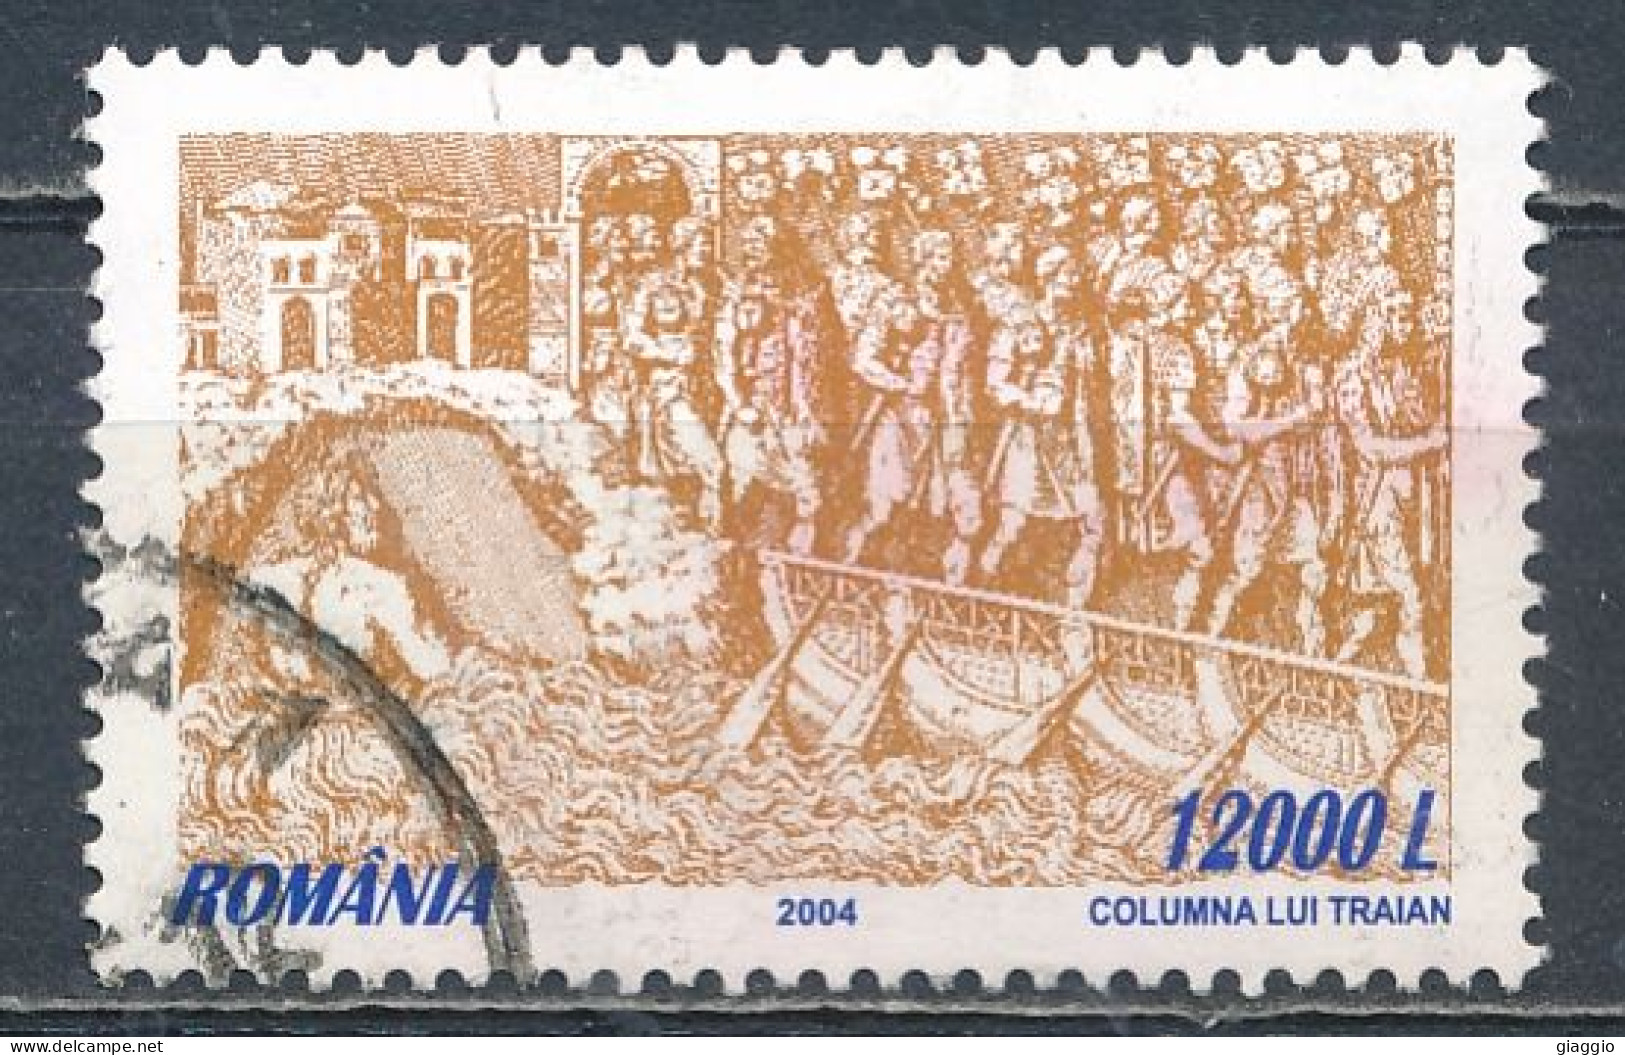 °°° ROMANIA - Y&T N° 4921 - 2004 °°° - Used Stamps